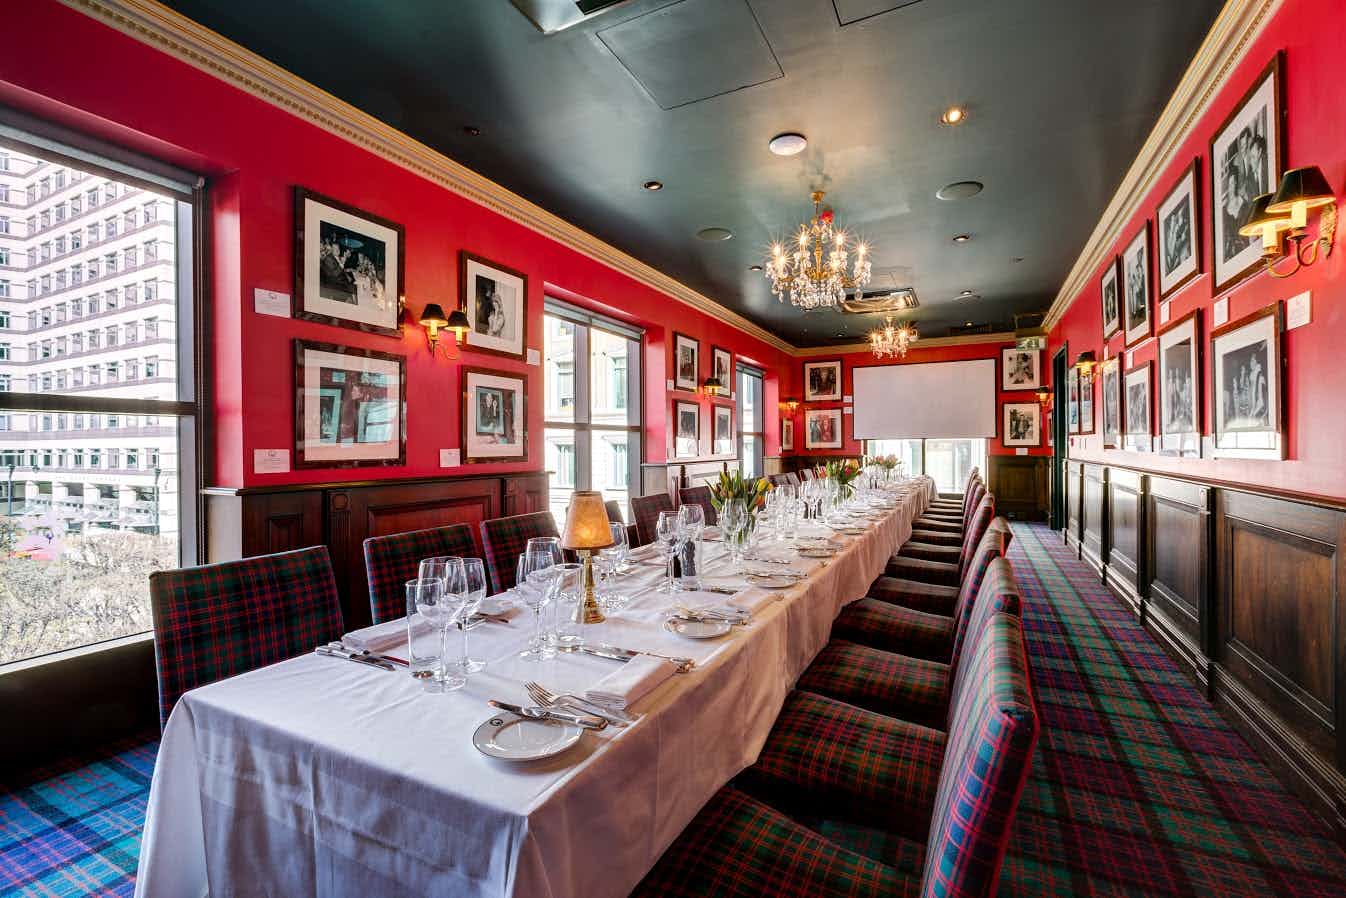 The Gallery Room, Boisdale of Canary Wharf